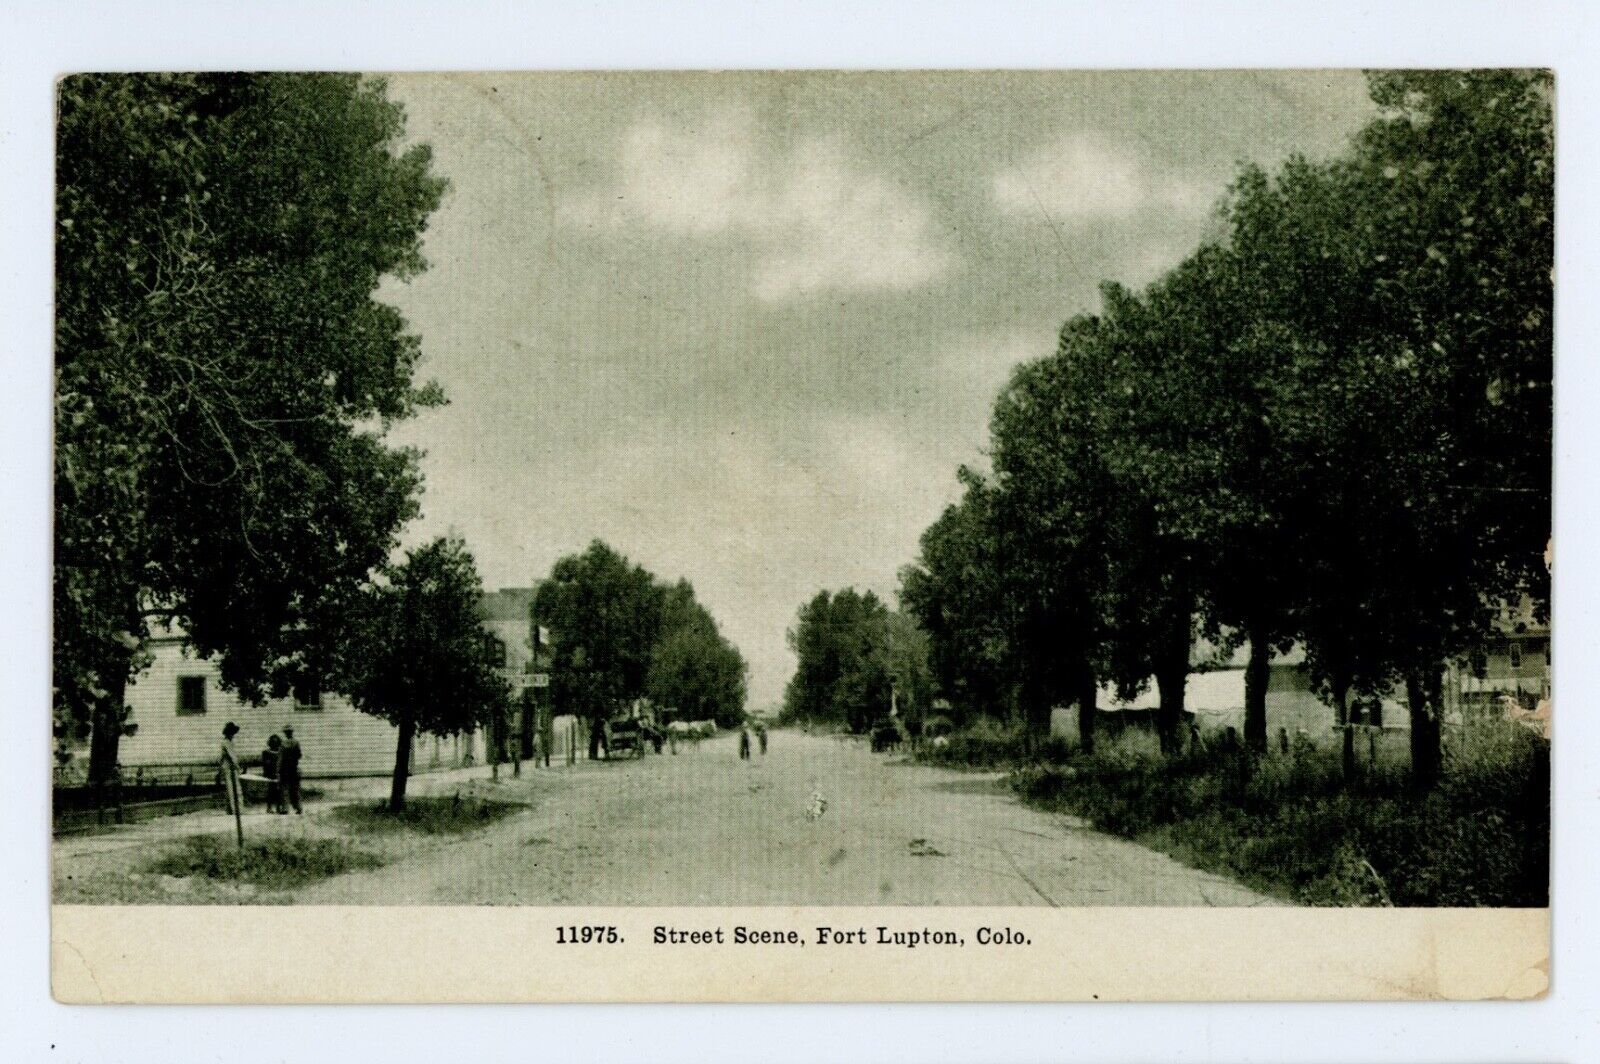 CO, Fort Lupton. STREET SCENE. Early Printed Postcard